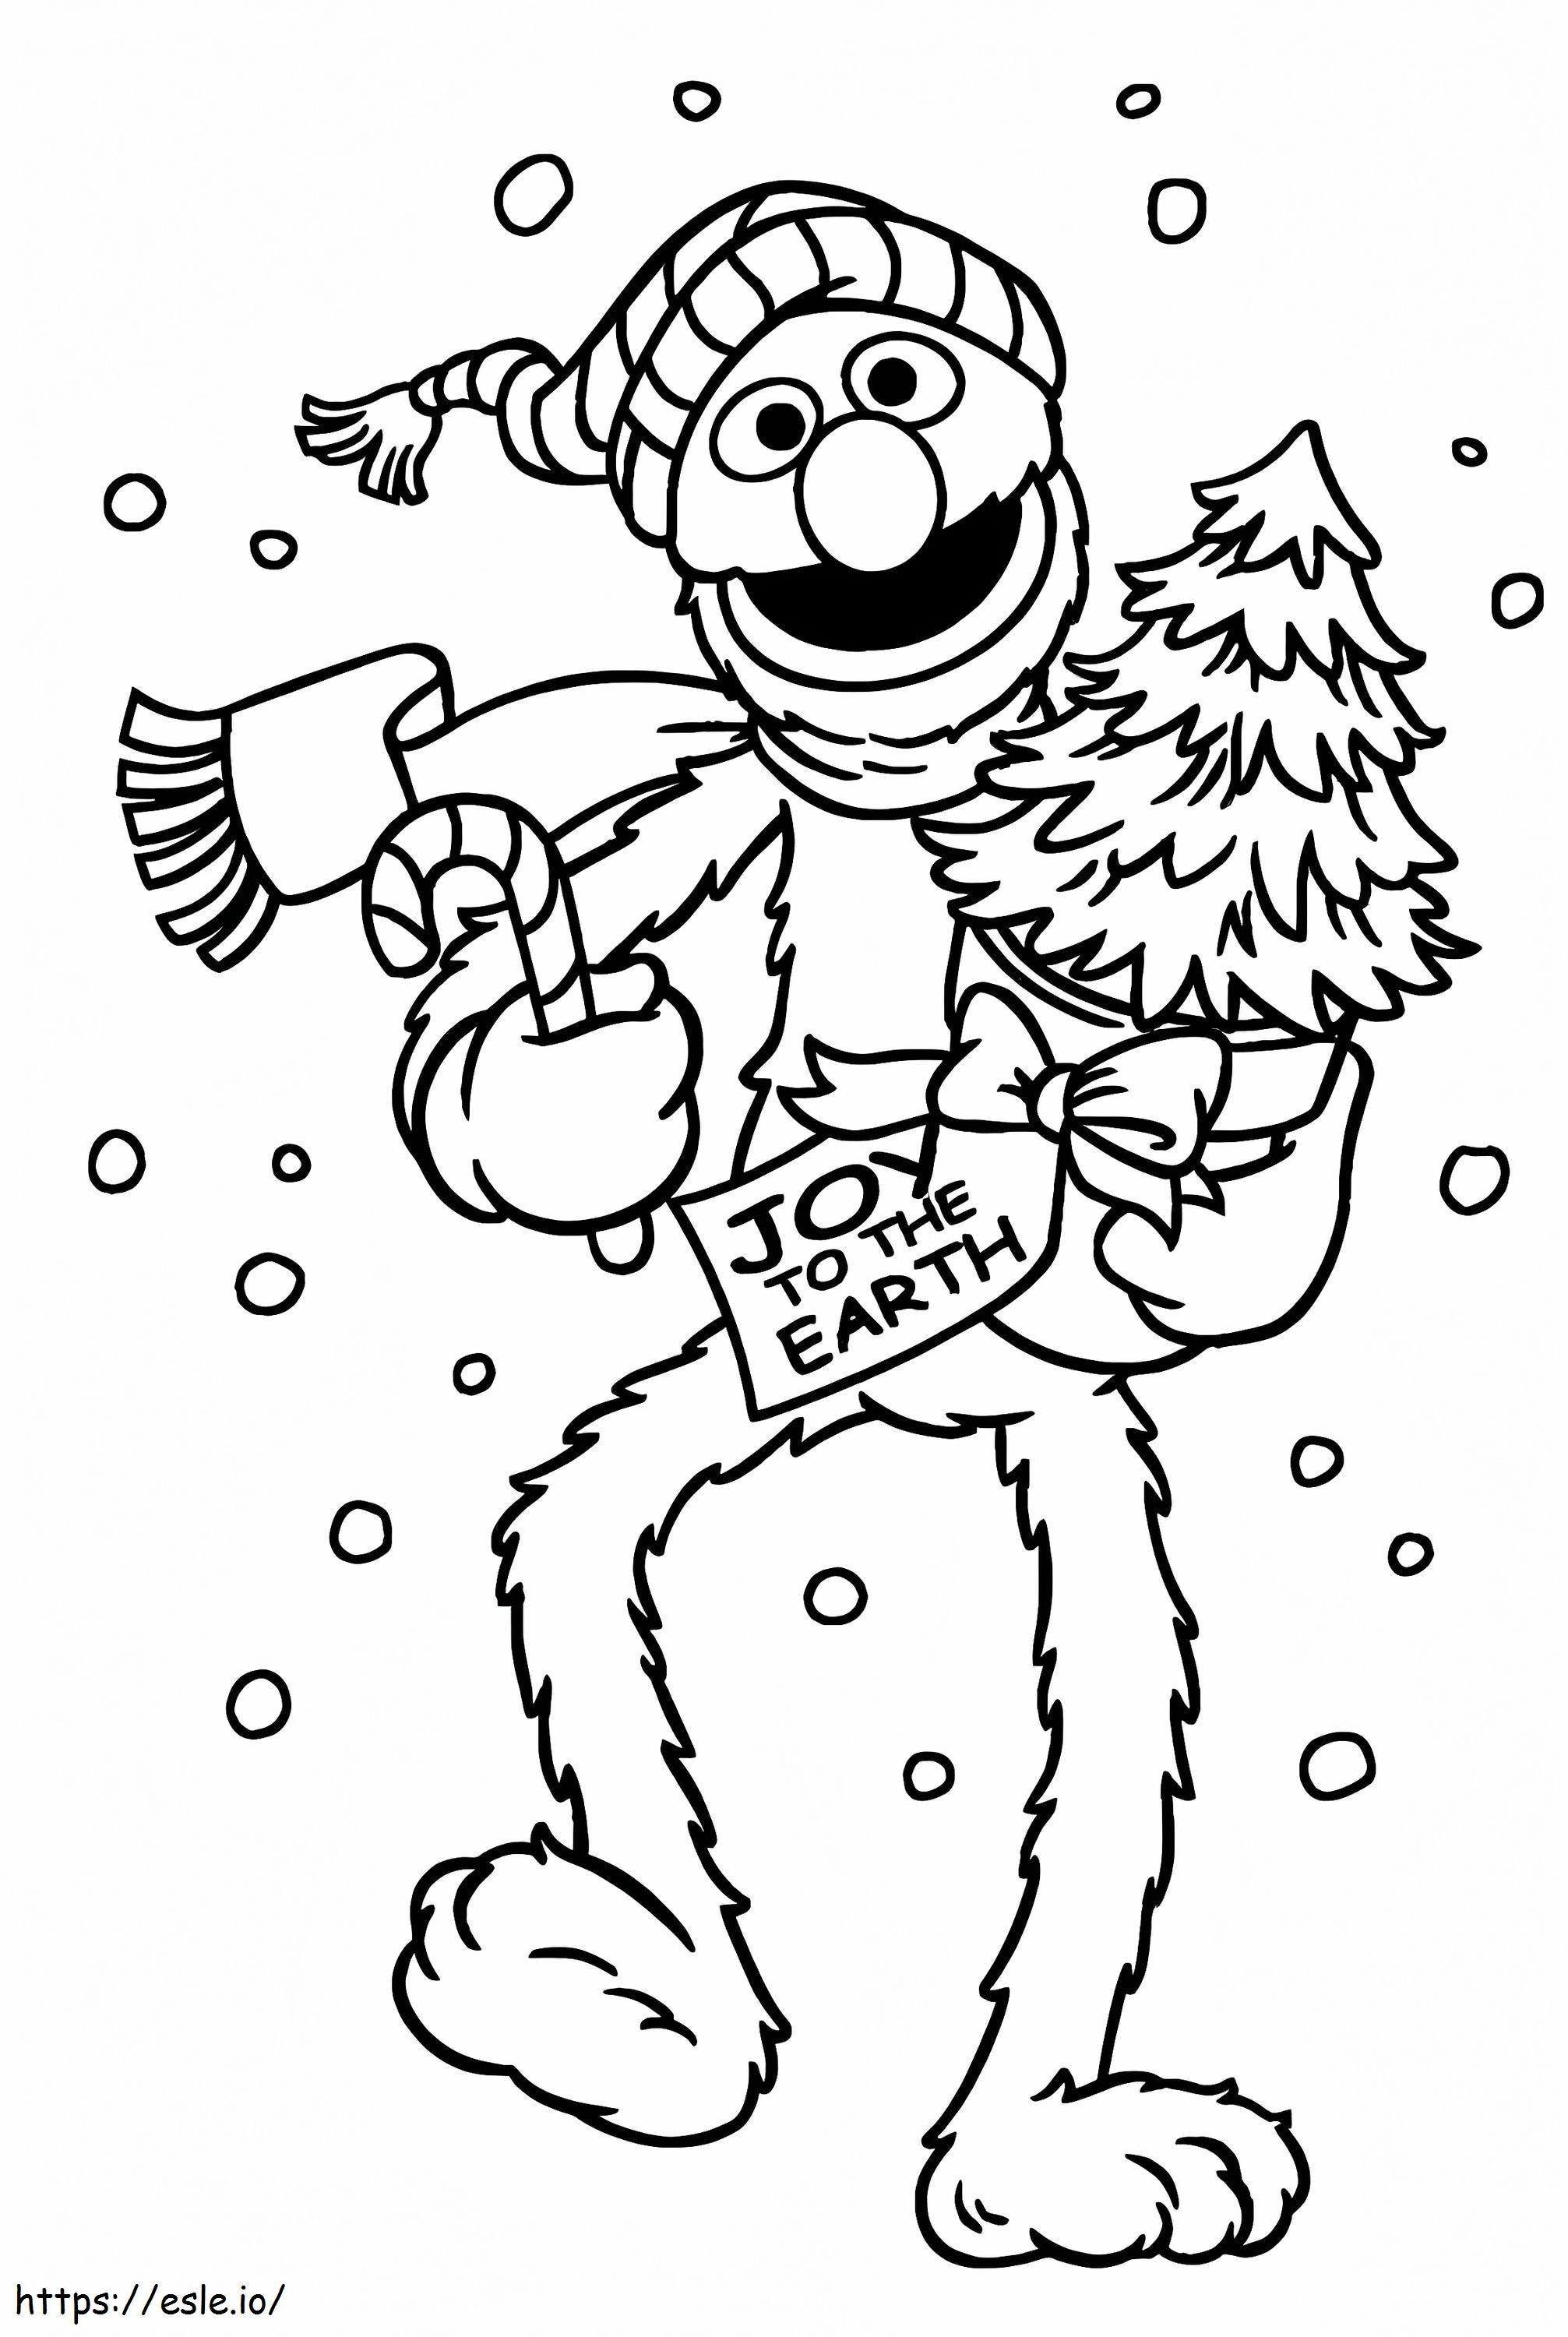 Grover On Christmas coloring page